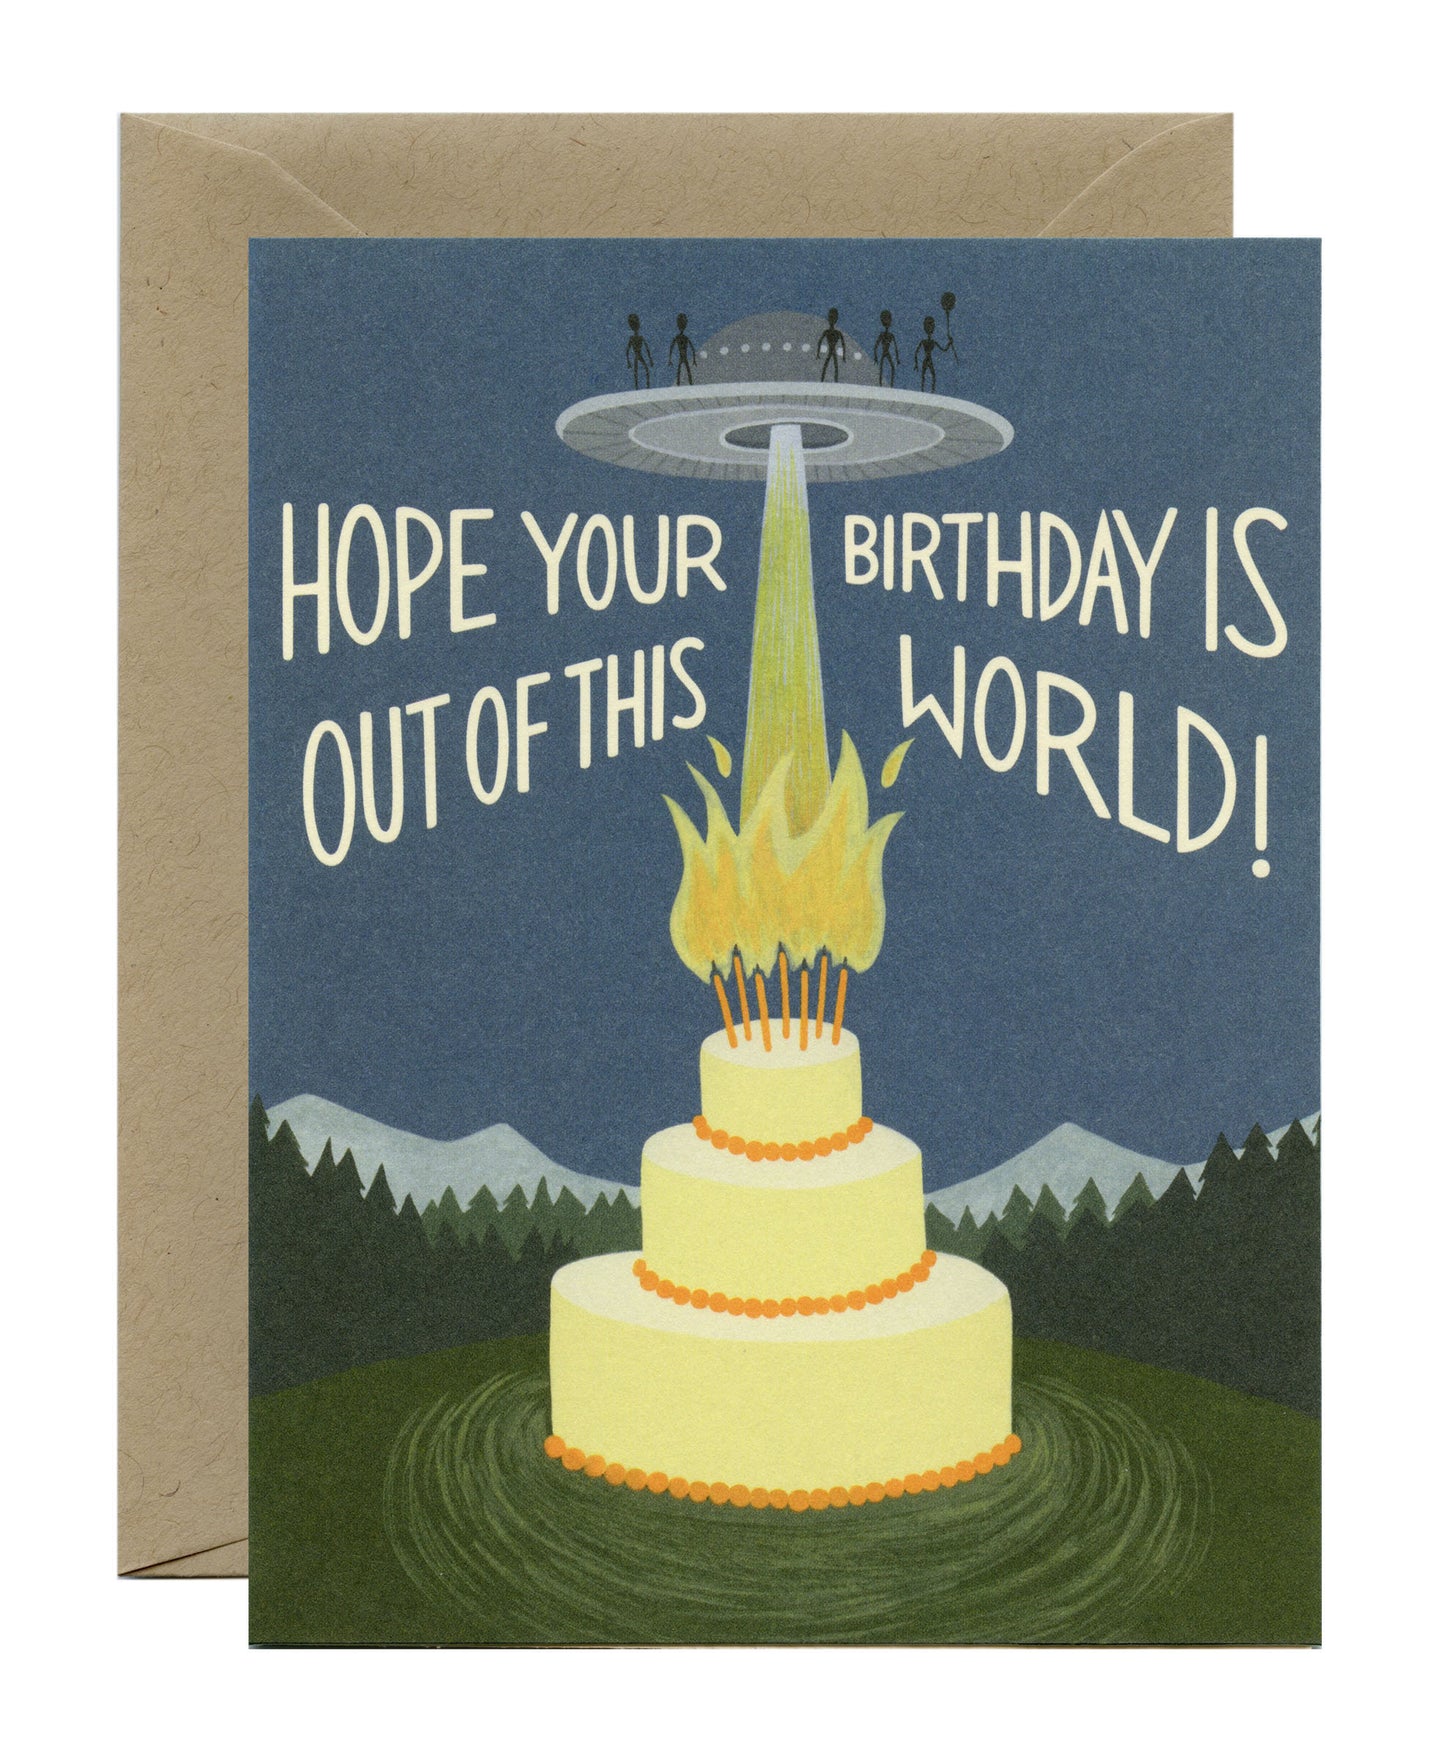 OUT OF THIS WORLD UFO, ALIENS AND CAKE - BIRTHDAY GREETING CARD